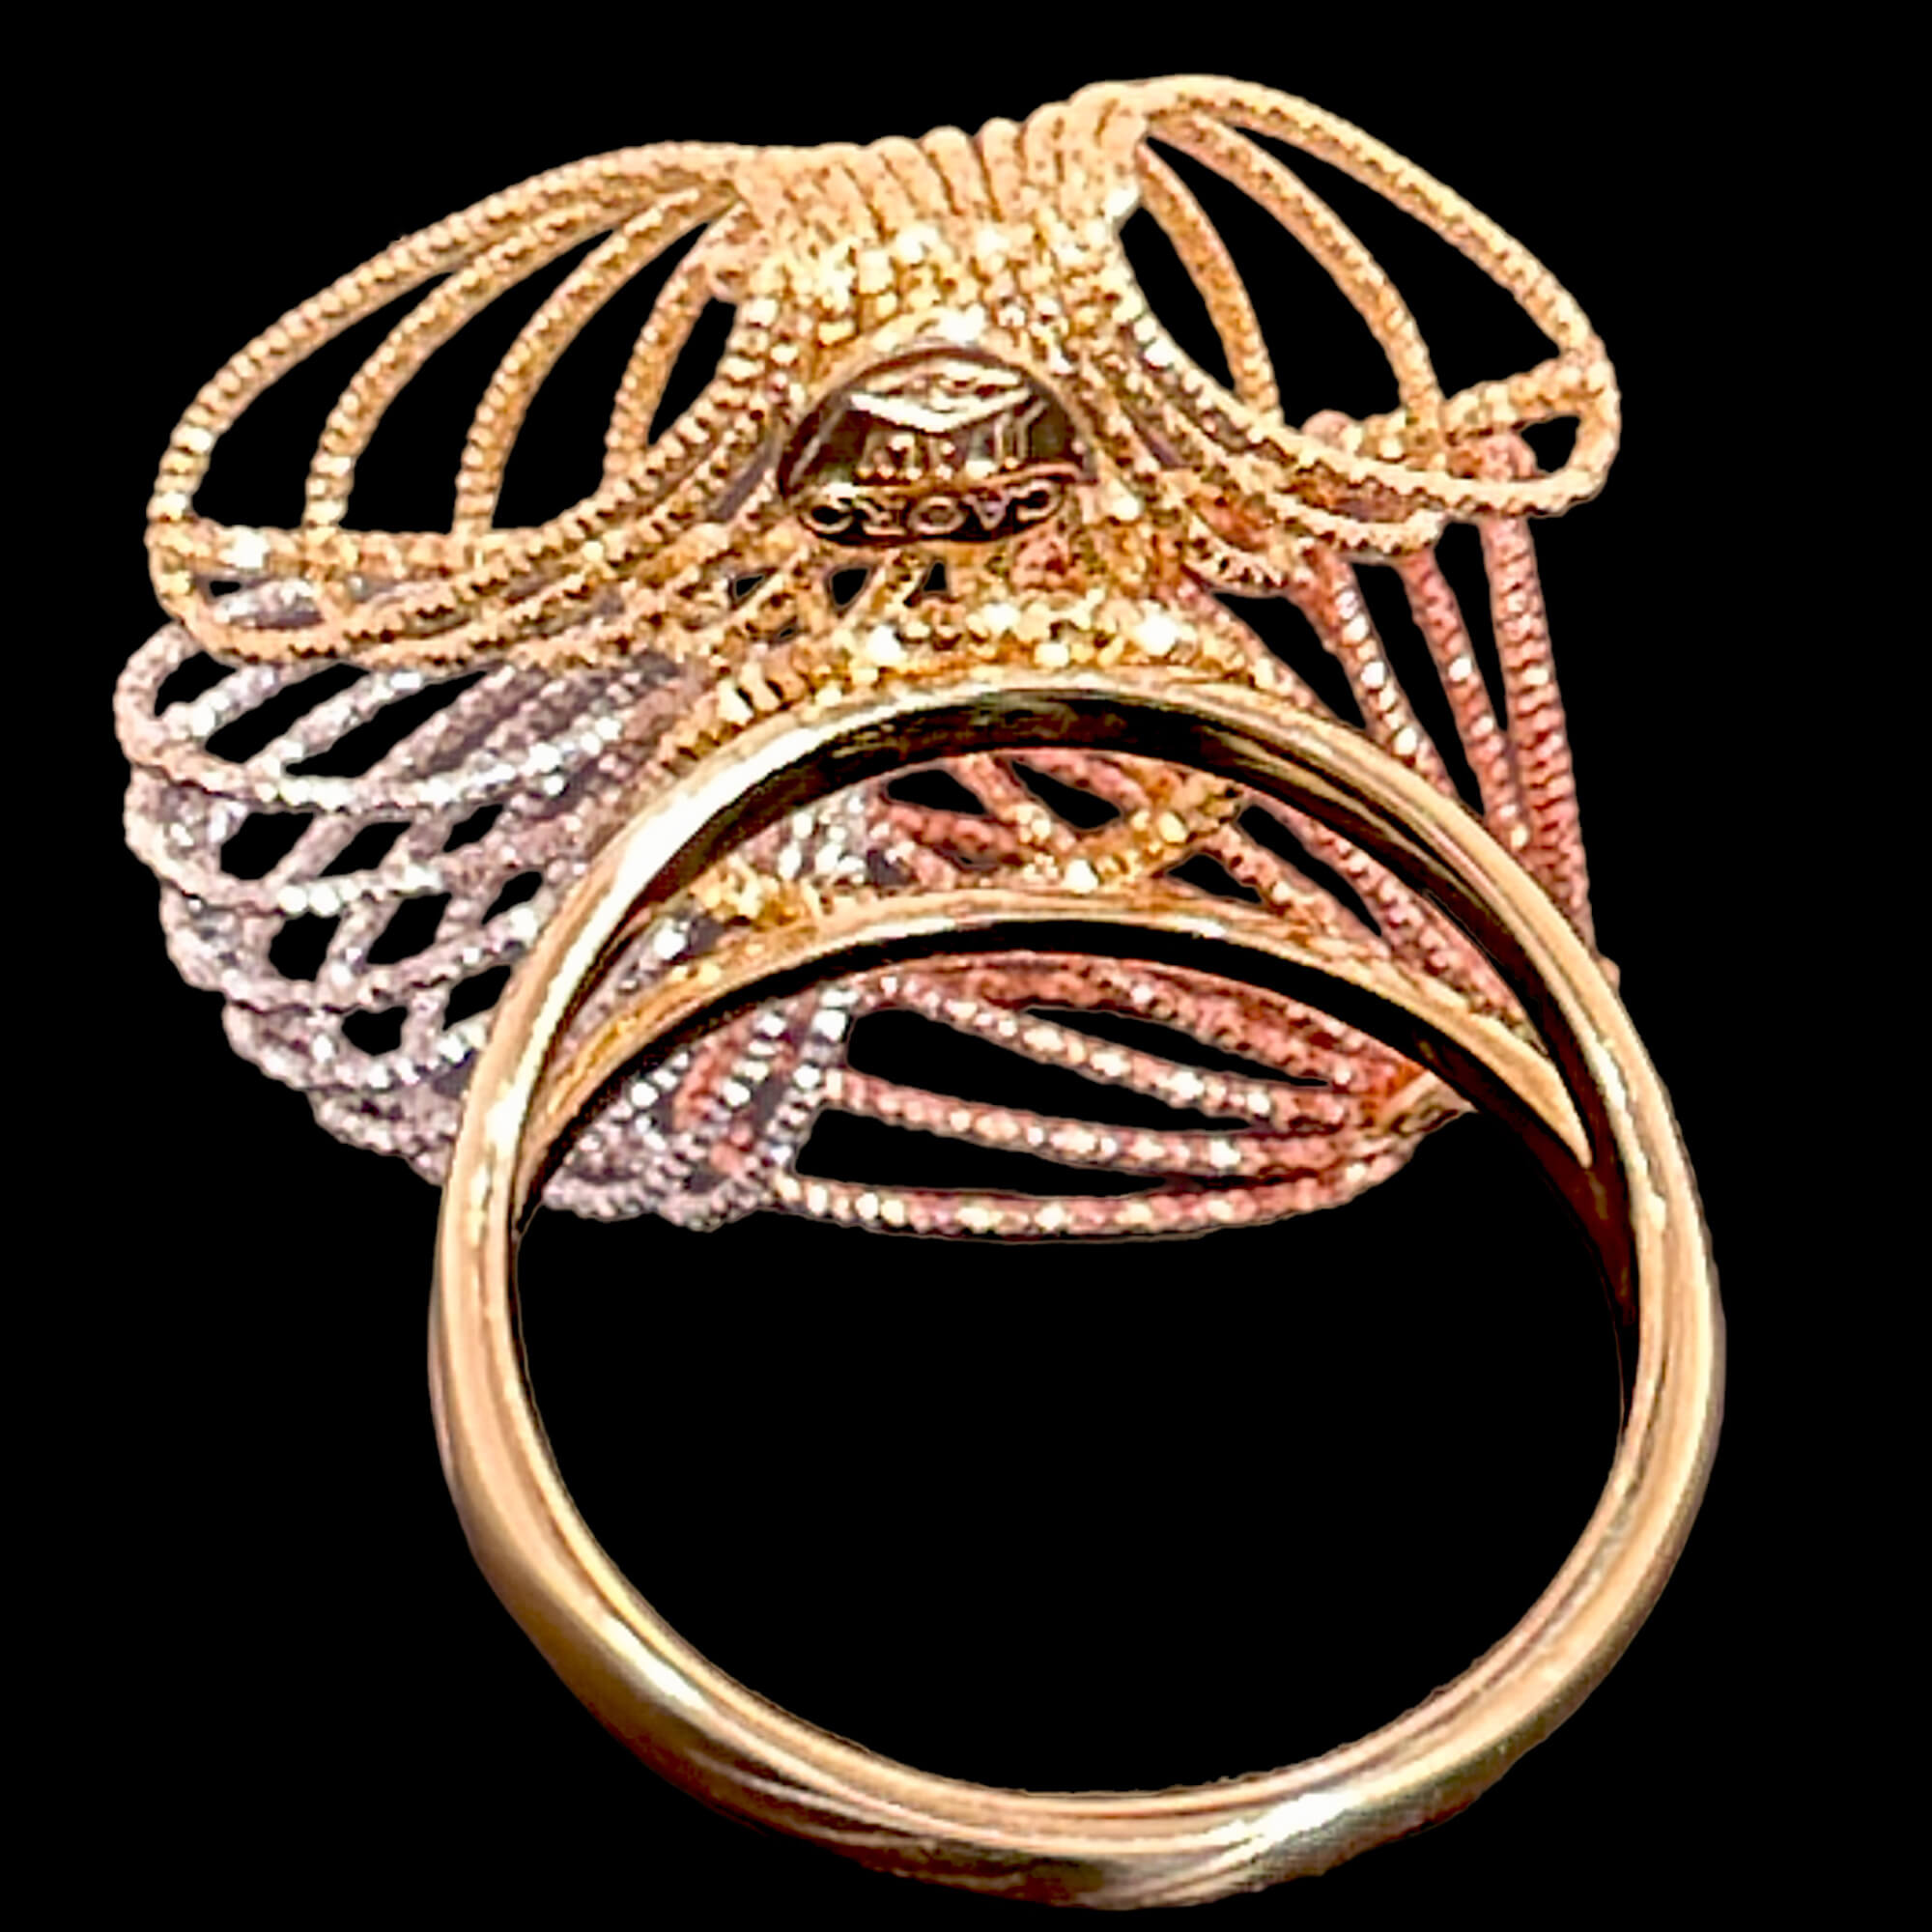 Worked three-color ring made of 18kt gold